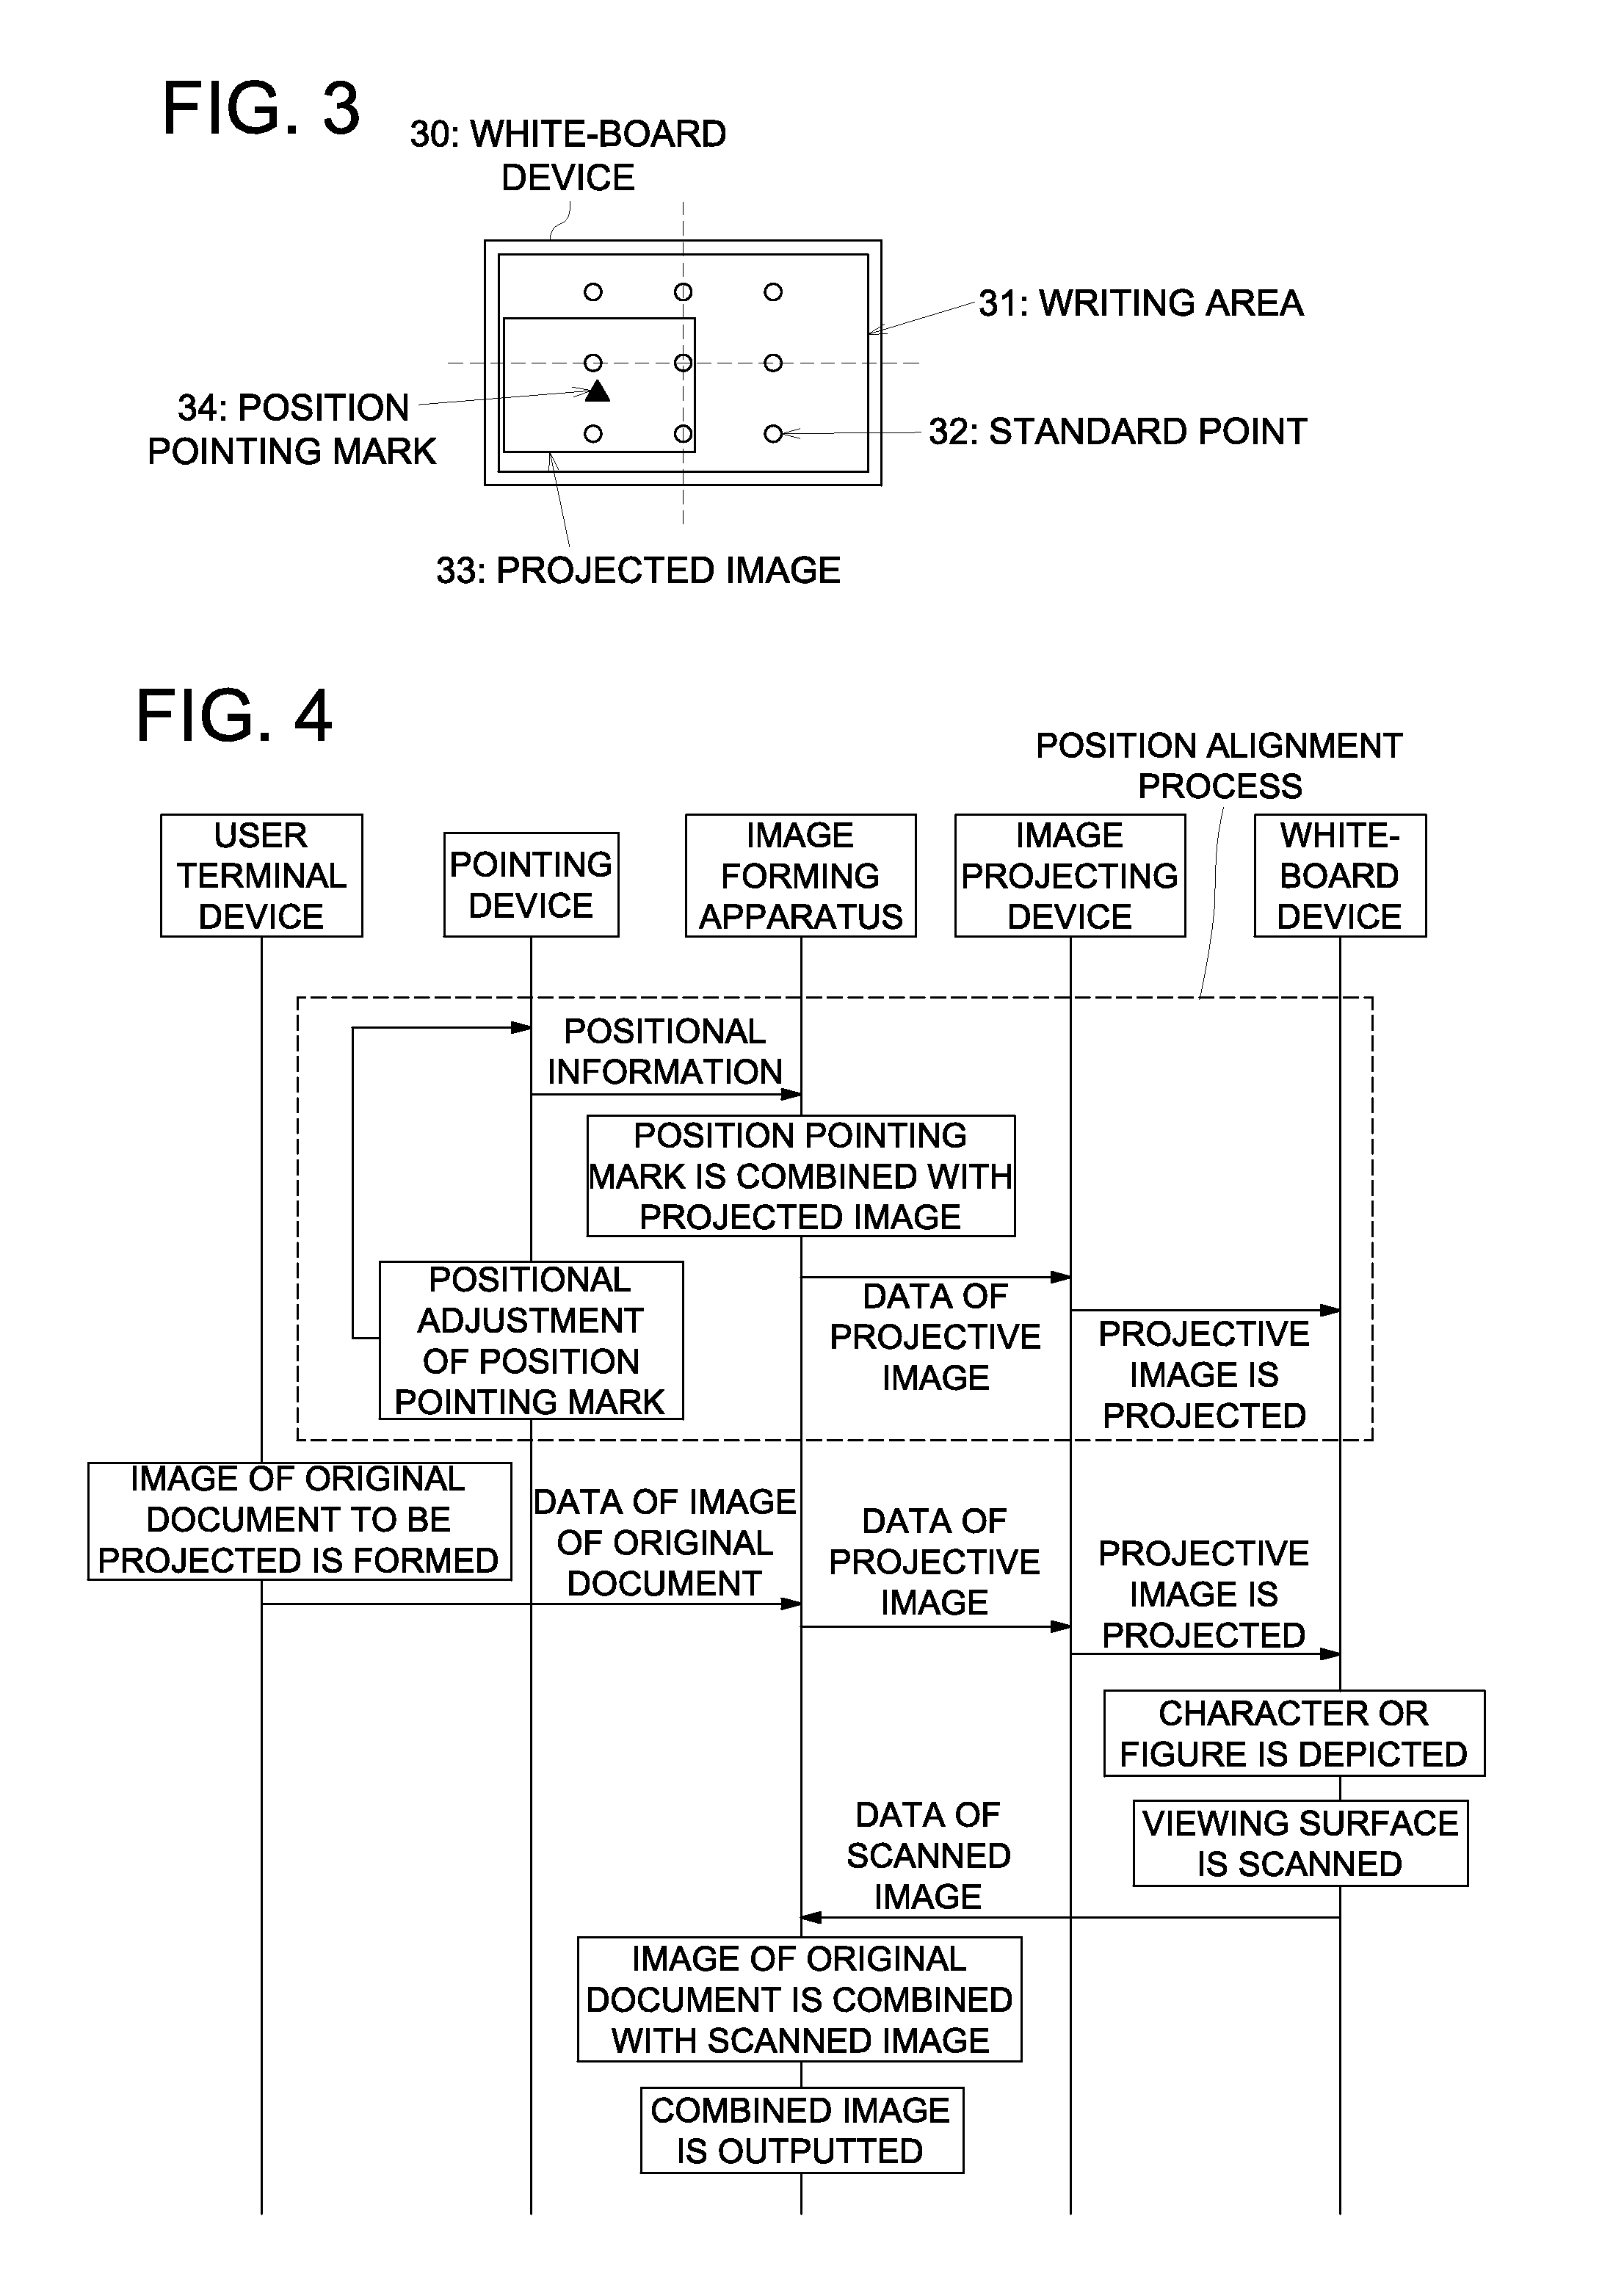 Image combining apparatus and method for aligning positions of images